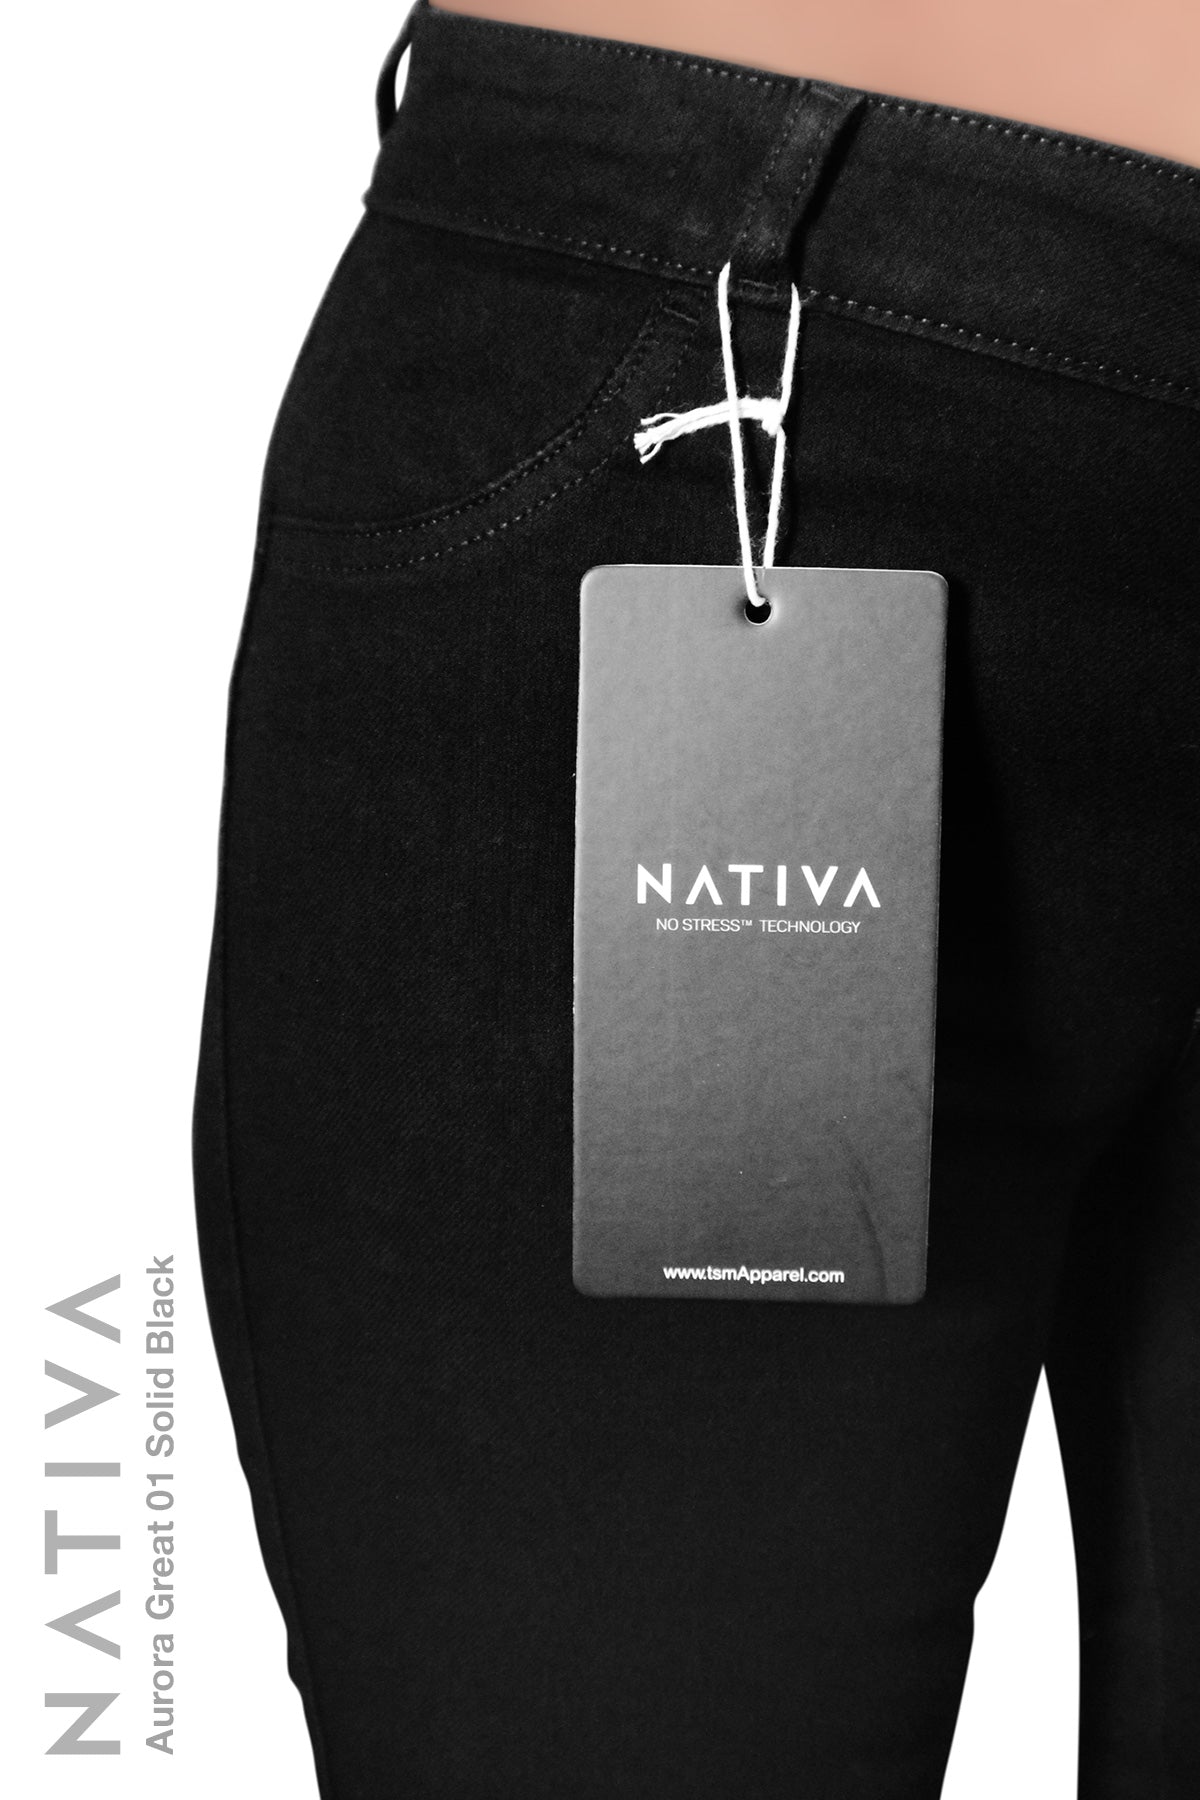 NATIVA, STRETCH JEANS. AURORA GREAT 01 BLACK, High Shaping Capacity, All-Season Wear, Mid-Waisted Super Skinny Jeans